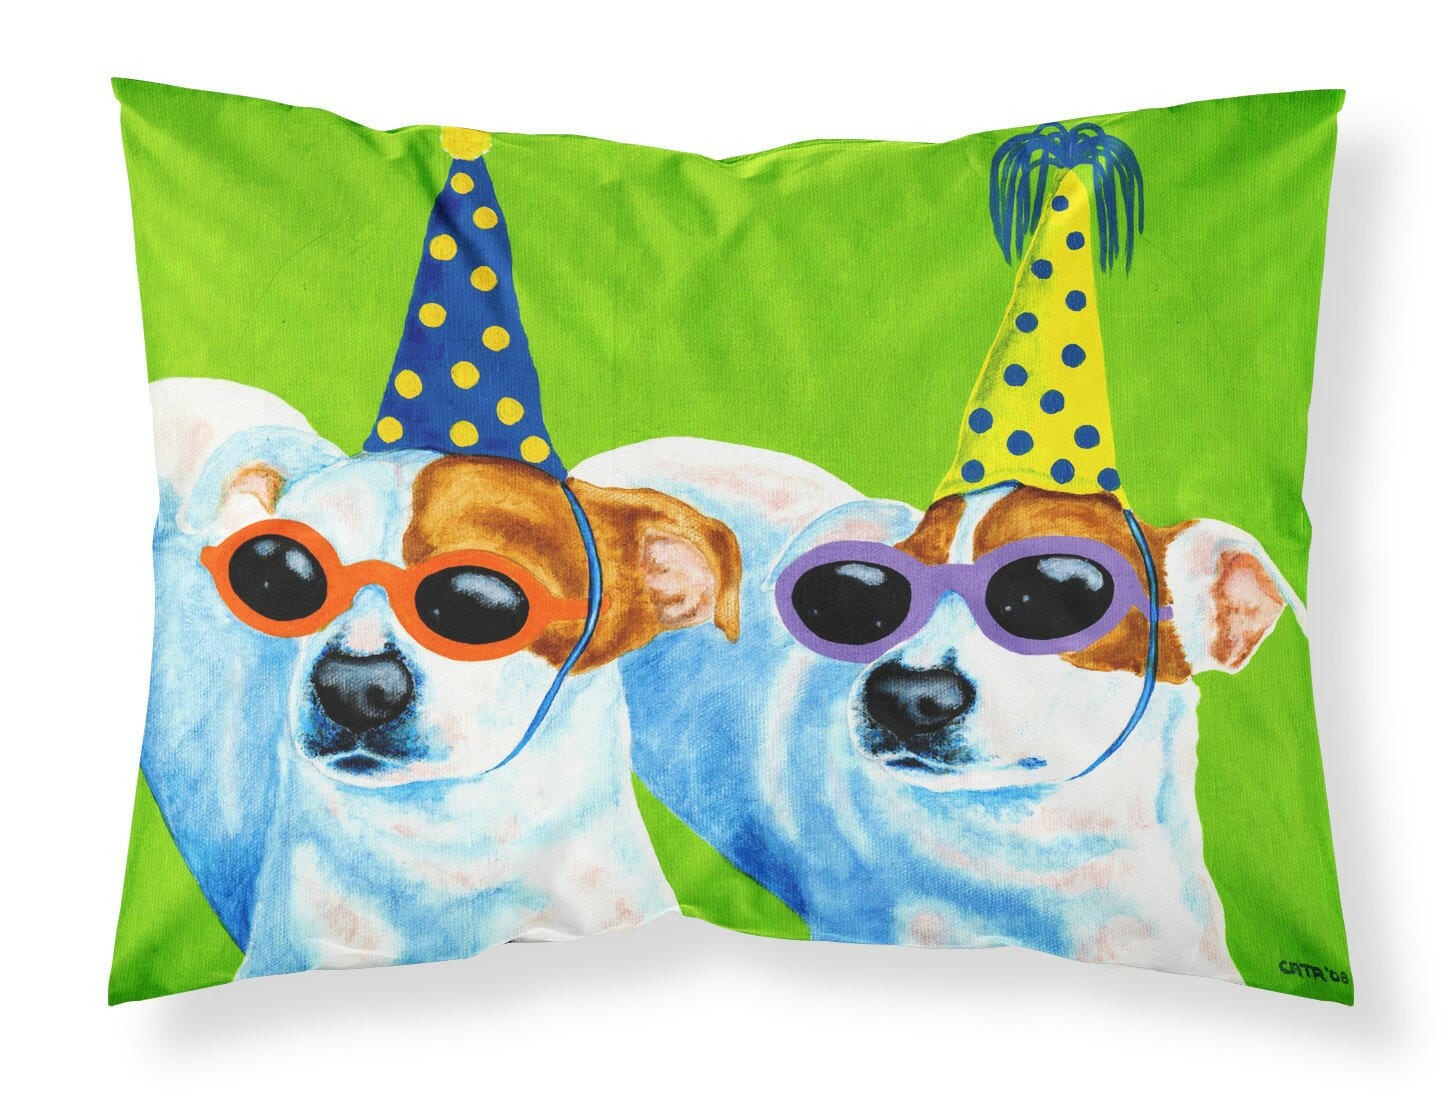 Party Animals Jack Russell Terriers Fabric Standard Pillowcase AMB1441PILLOWCASE by Caroline's Treasures